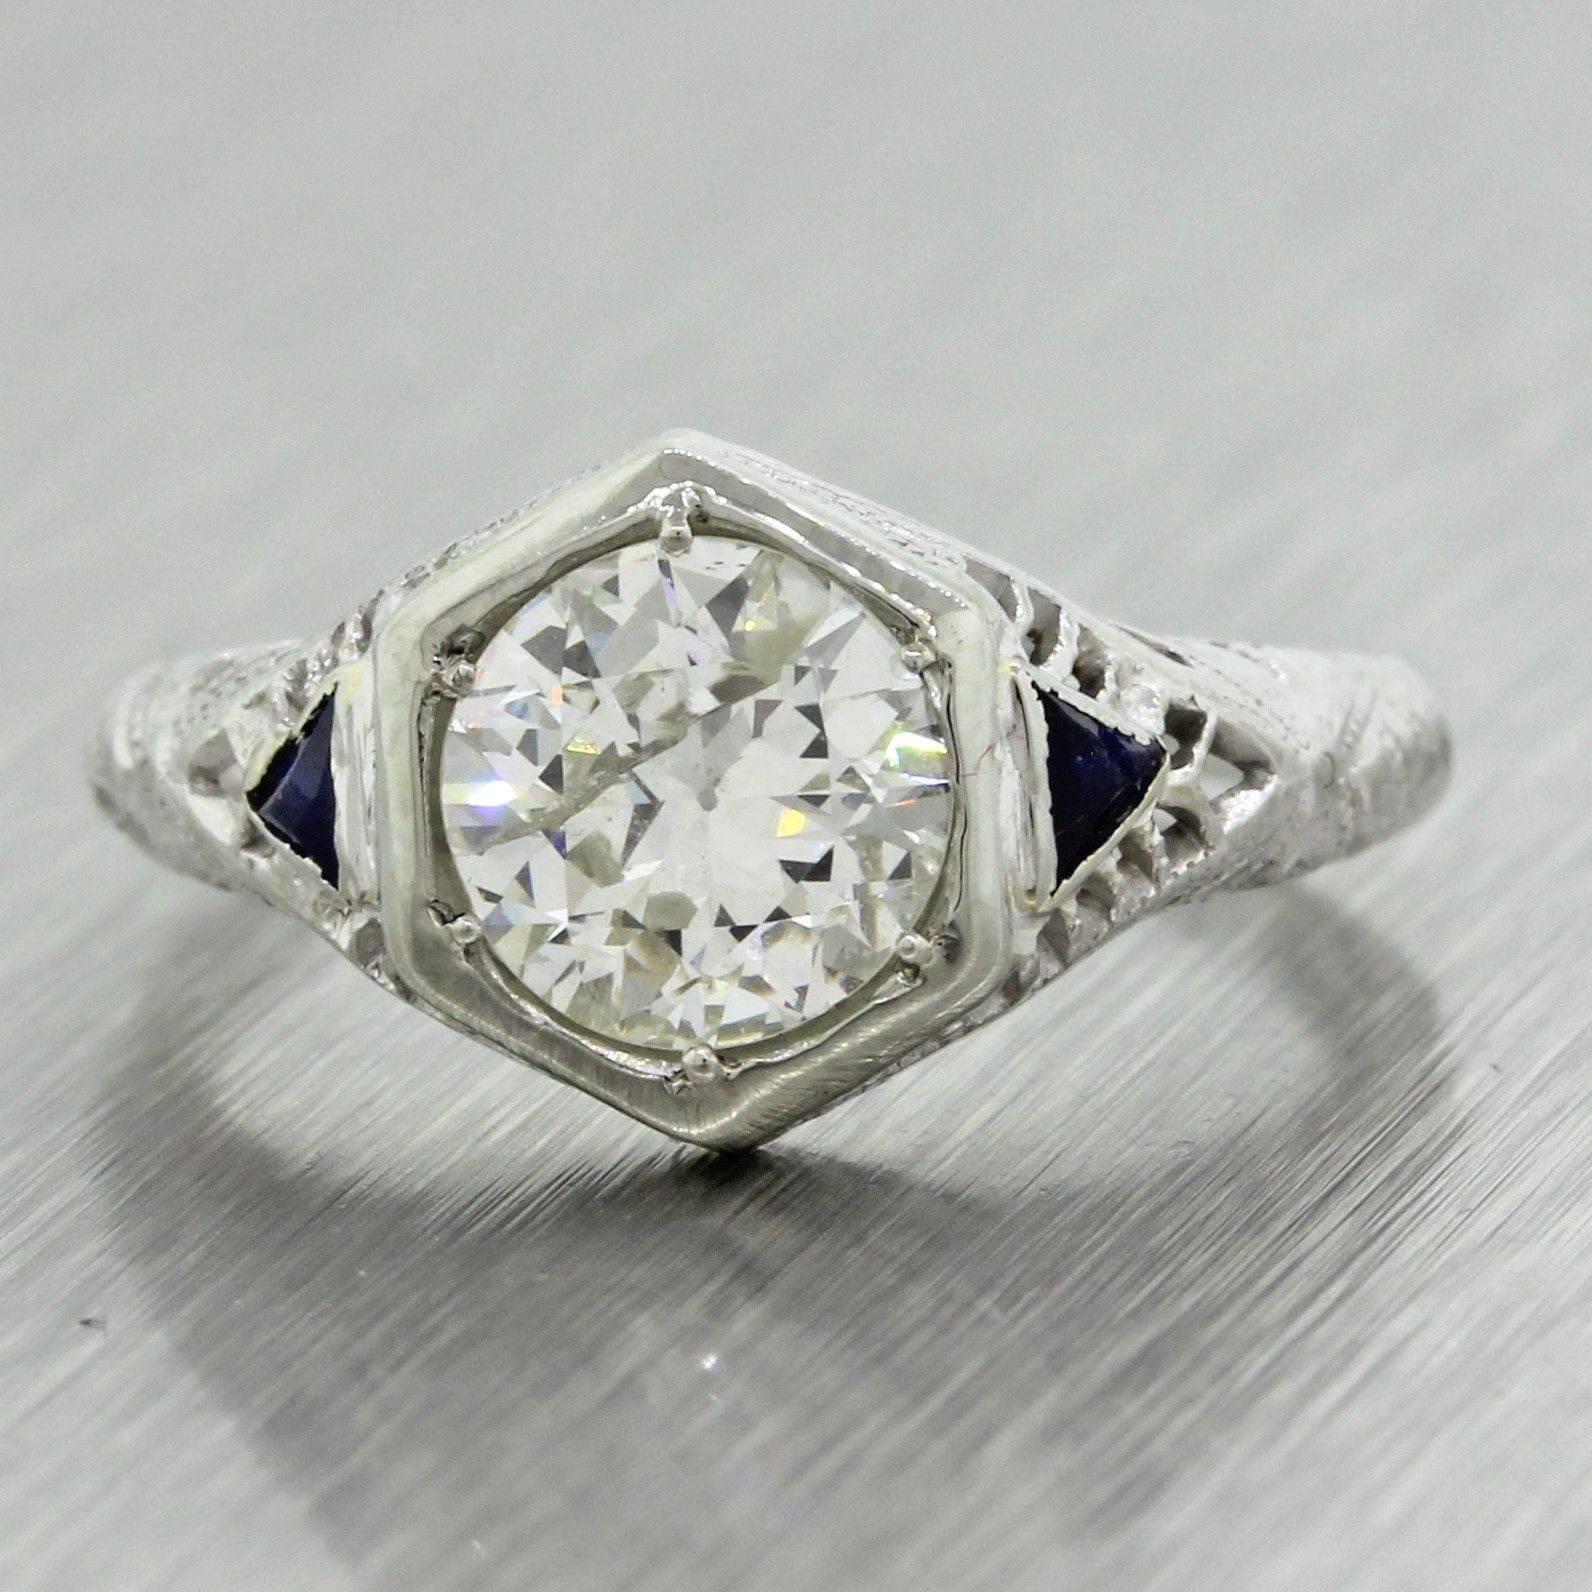 1920s Art Deco 1.14 Carat Diamond Sapphire Gold Engagement EGL Ring In Excellent Condition For Sale In Huntington, NY